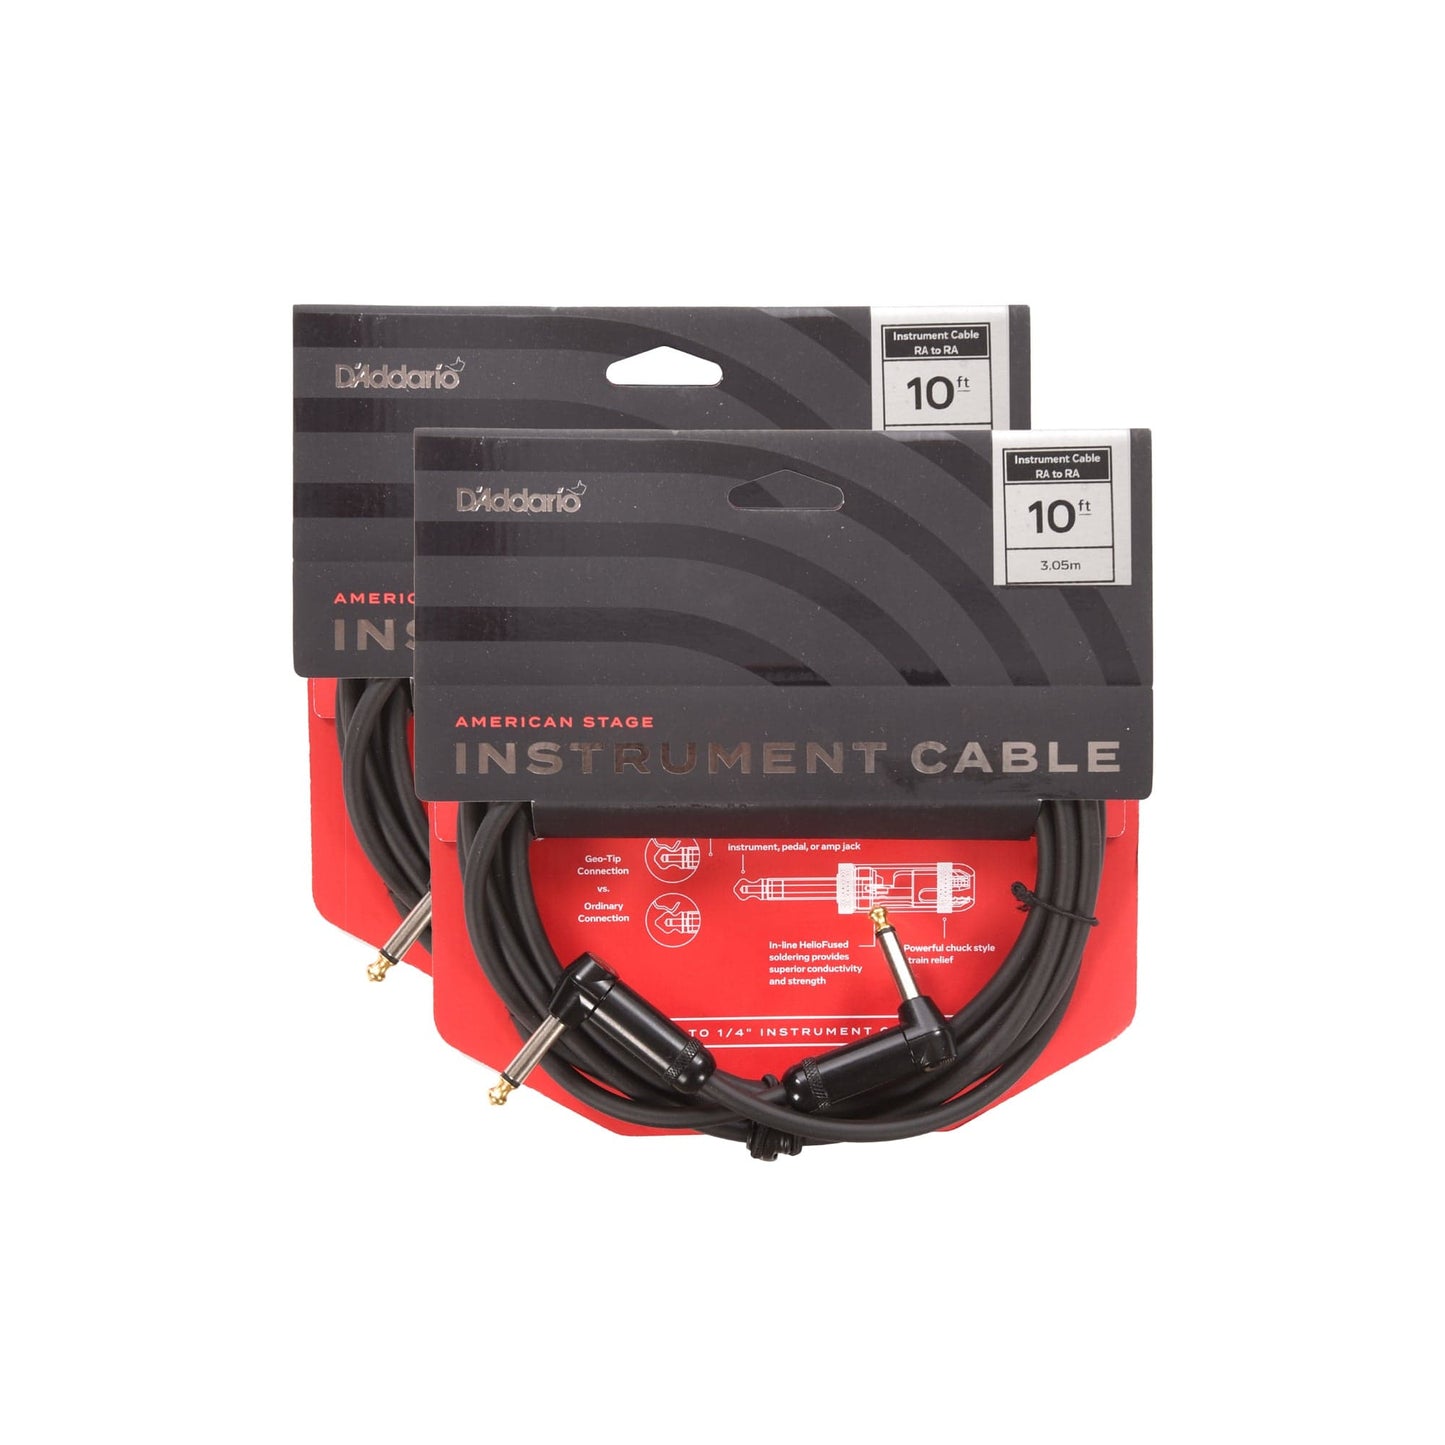 D'Addario American Stage Instrument Cable 10' Angle-Angle 2 Pack Bundle Accessories / Cables